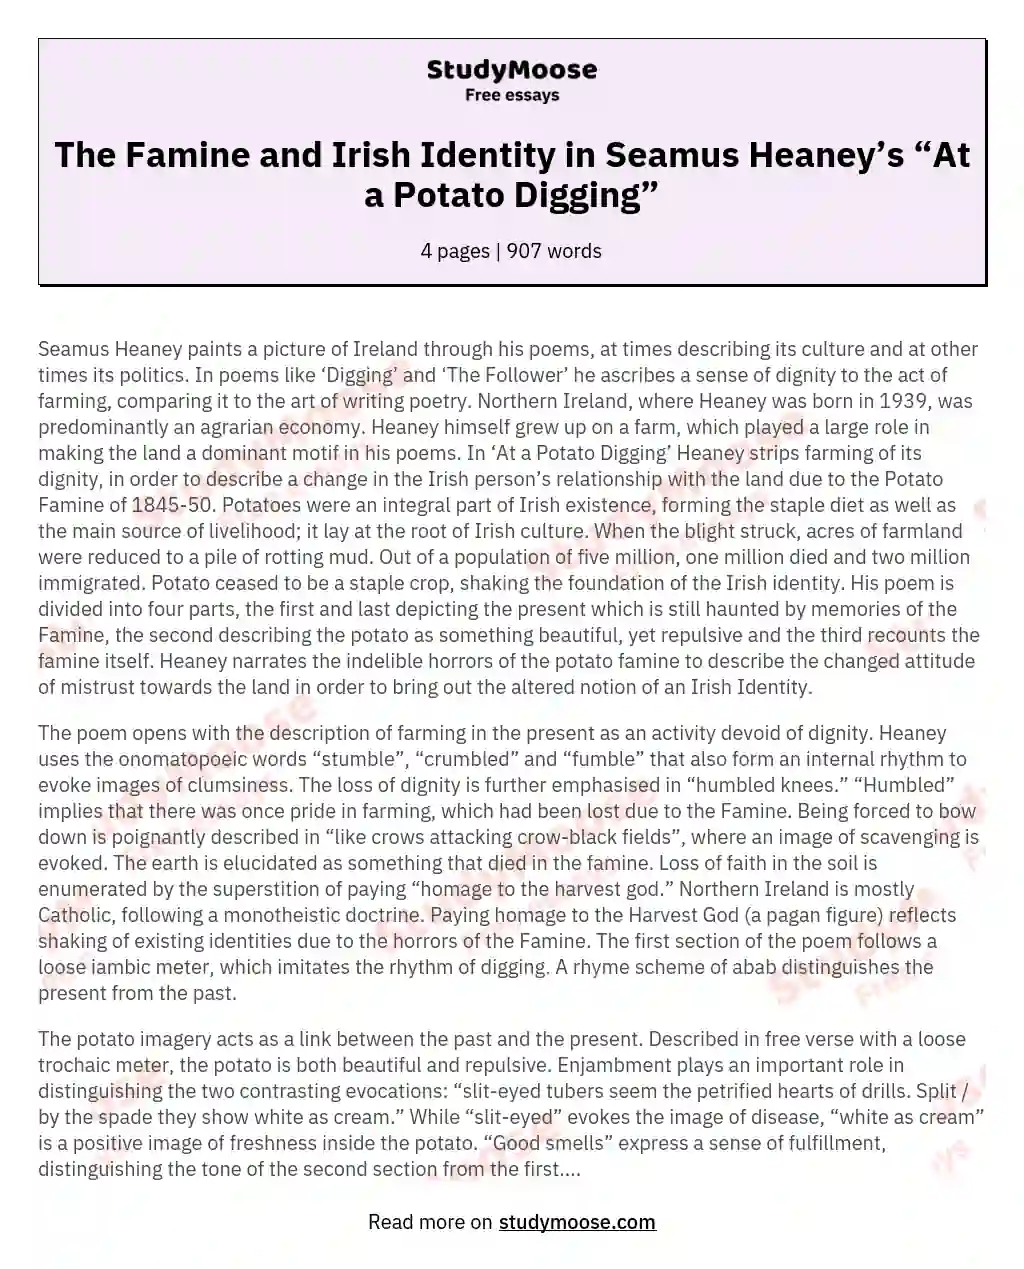 The Famine and Irish Identity in Seamus Heaney’s “At a Potato Digging”